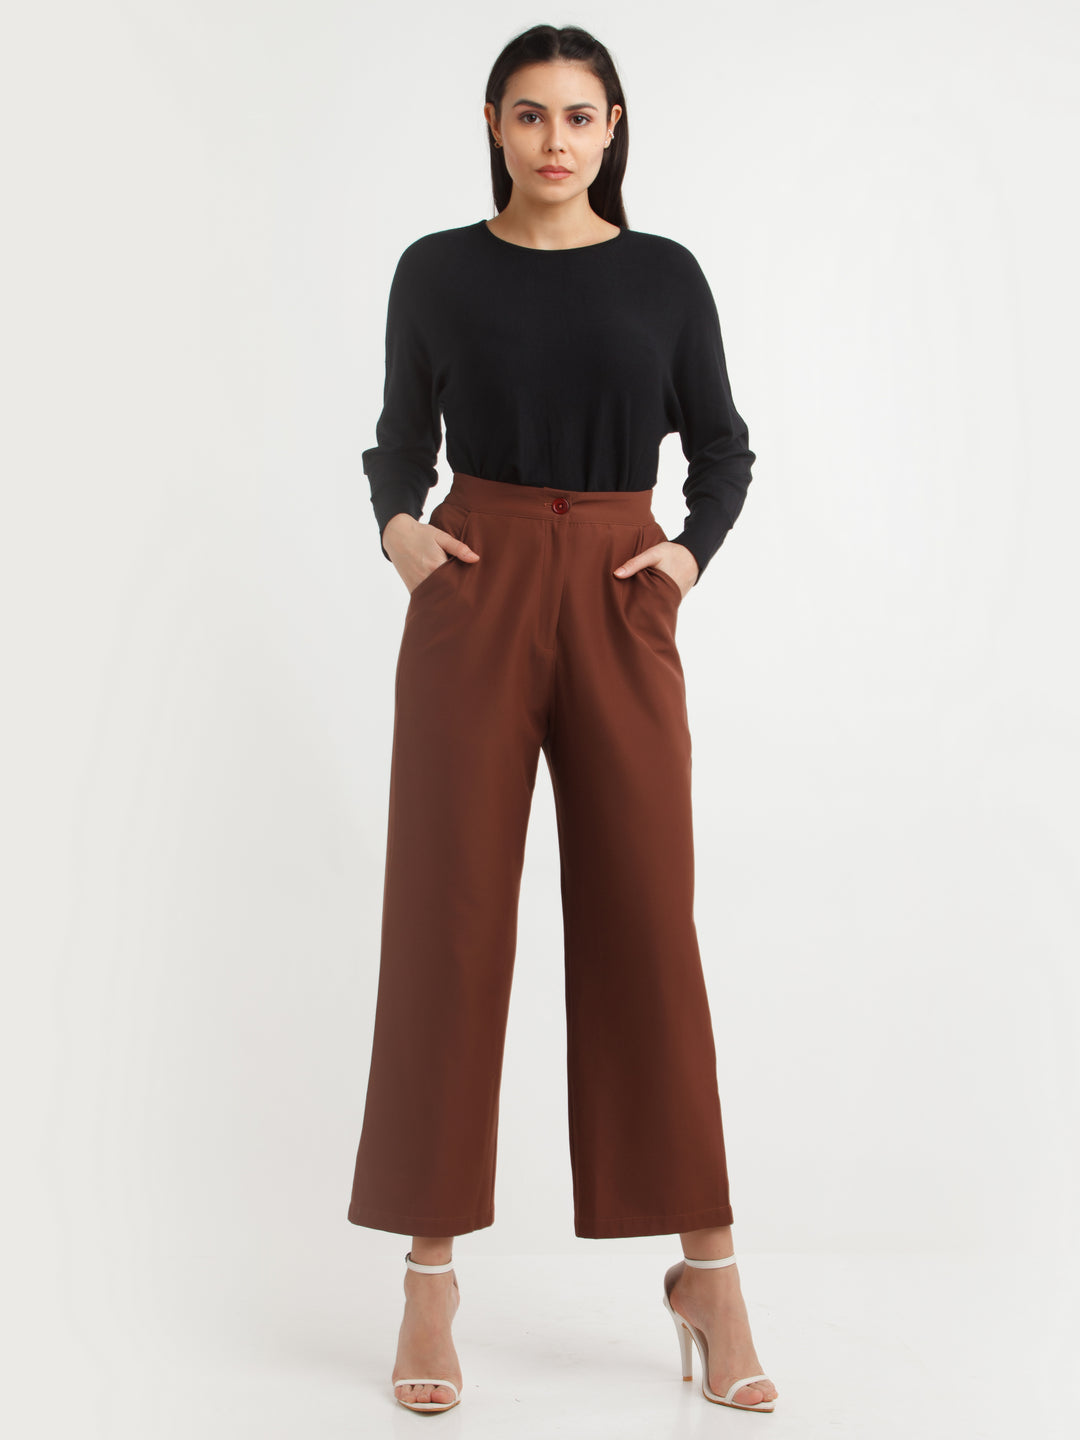 Brown Solid Pants For Women